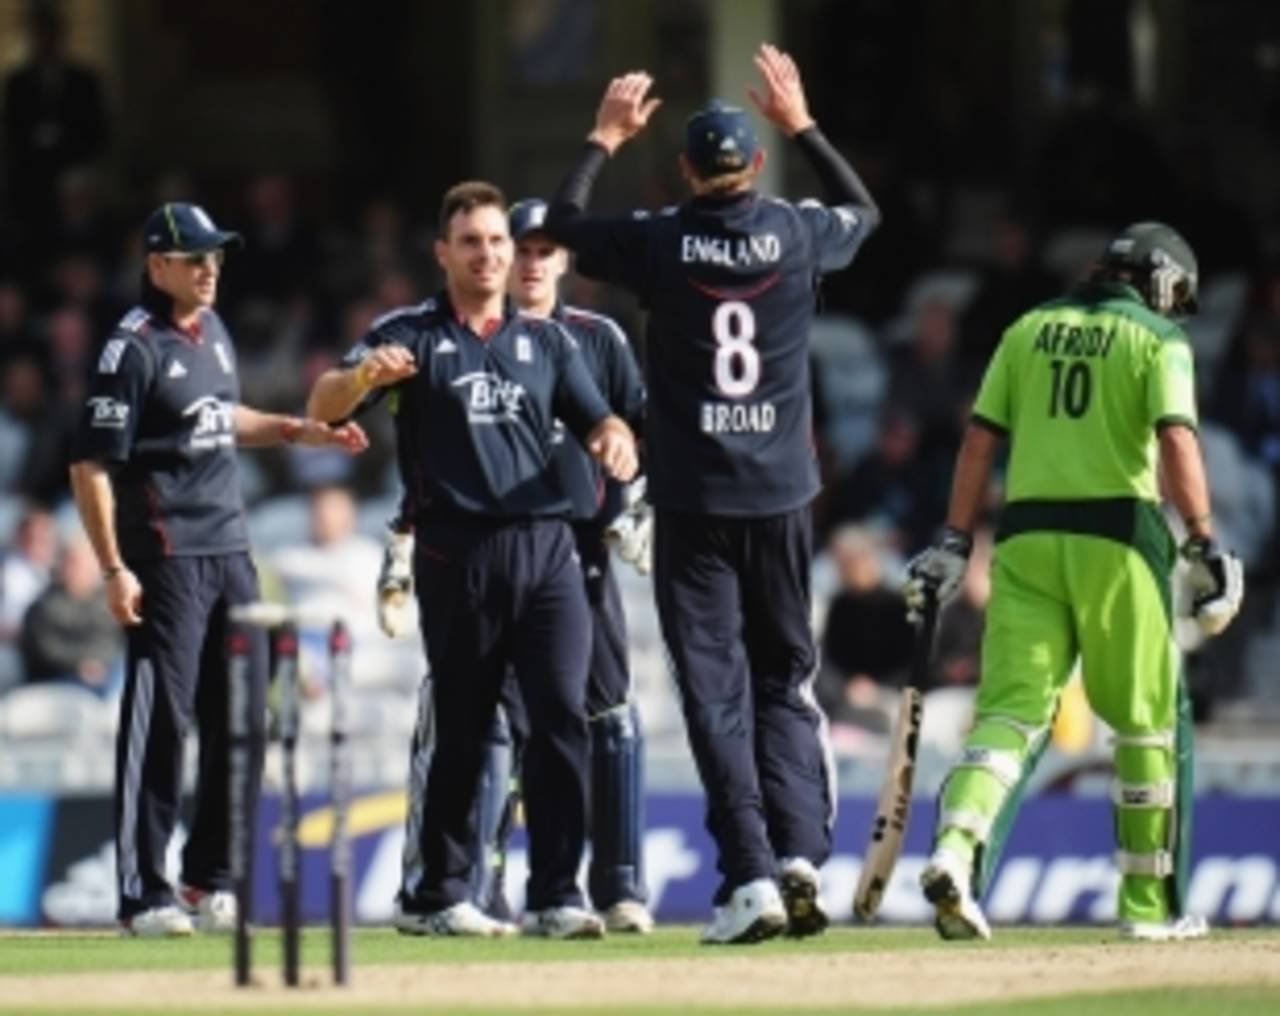 Shahid Afridi's run out stalled Pakistan's charge at a crucial stage, England v Pakistan, 3rd ODI, The Oval, September 17 2010